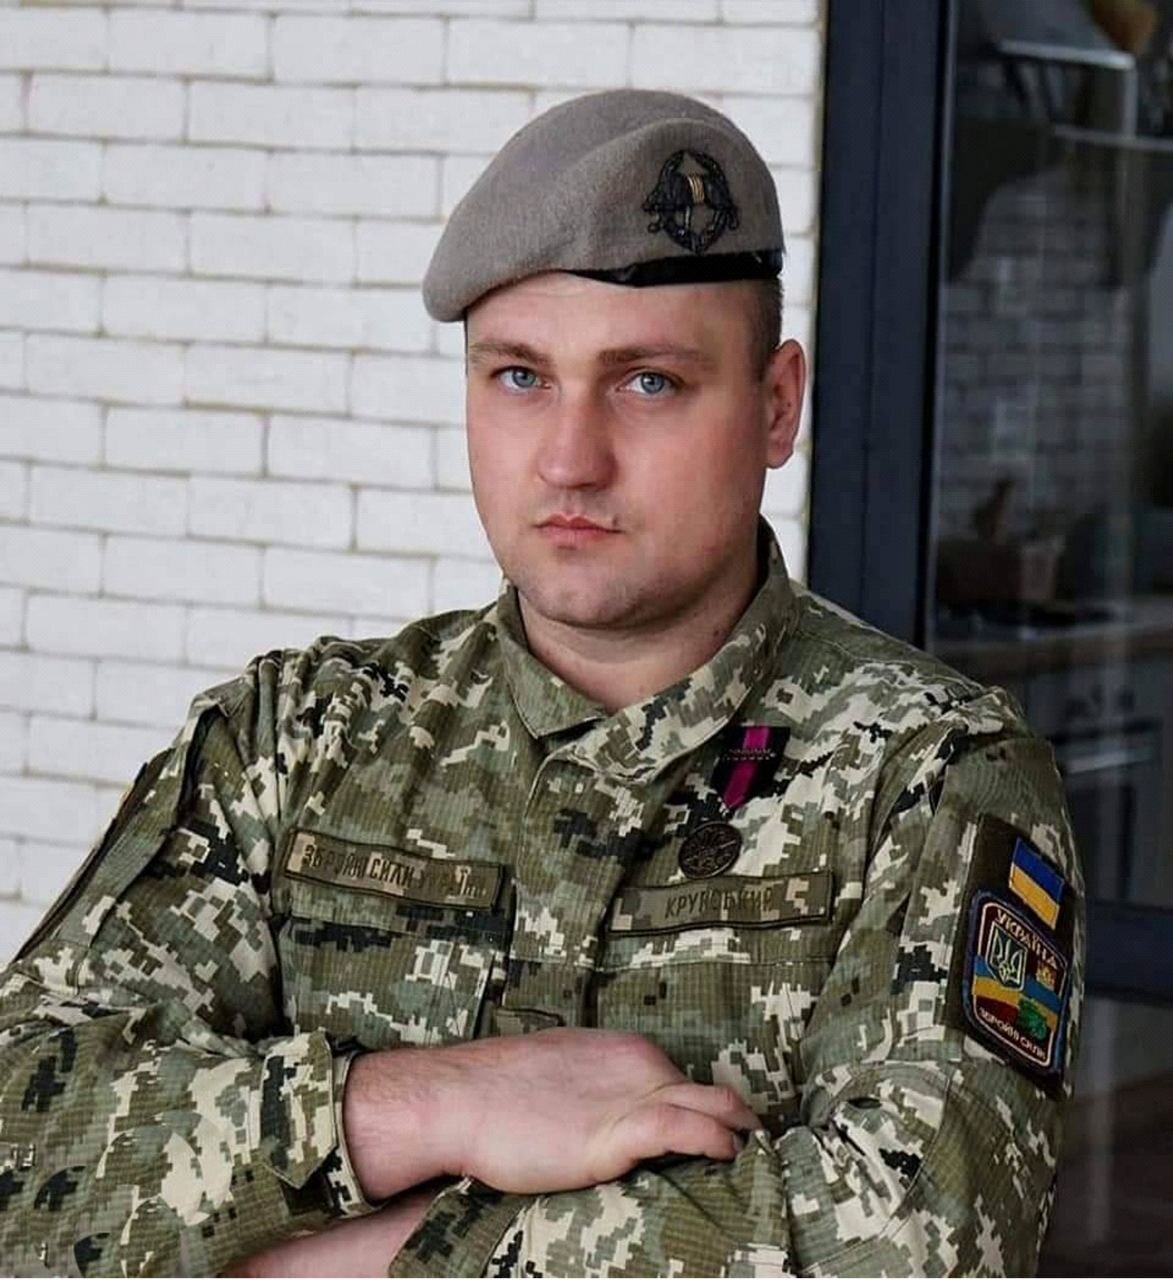 Stories from the Front (1): Q & A with Ukrainian Volunteer Soldier